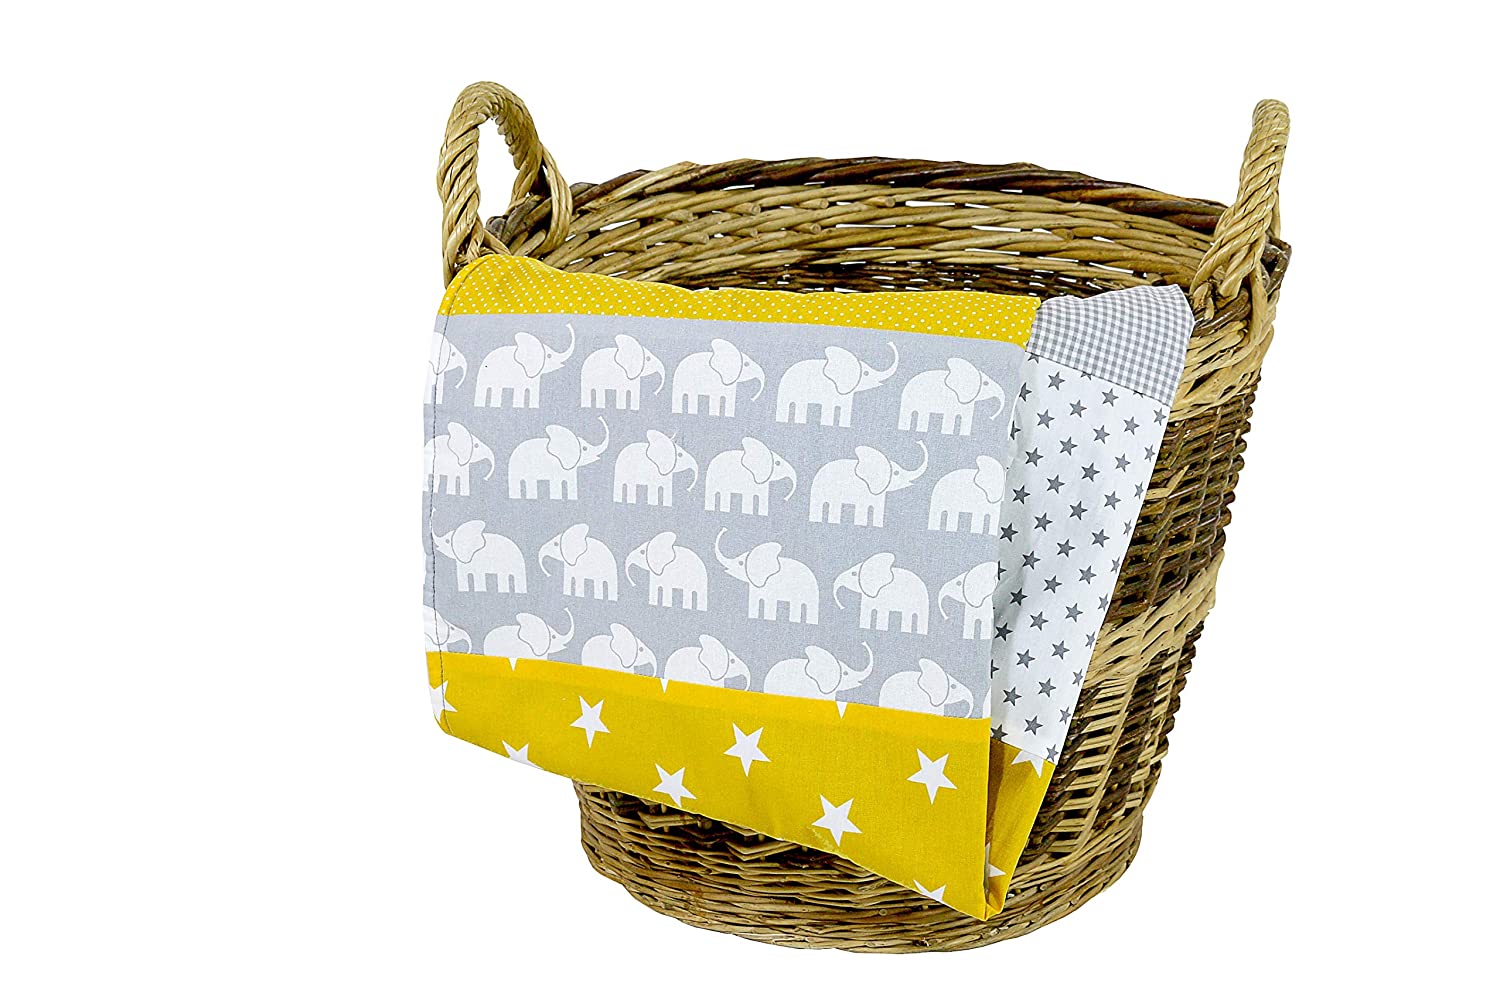 ULLENBOOM® Baby Blanket made of ÖkoTex Cotton and Fleece, Ideal as a Pram Blanket or Play Blanket, 70 x 100 cm & 100 x 140 cm and Made in the EU, Design: Stars, Dots, Patchwork 70 x 100 cm Elephant yellow